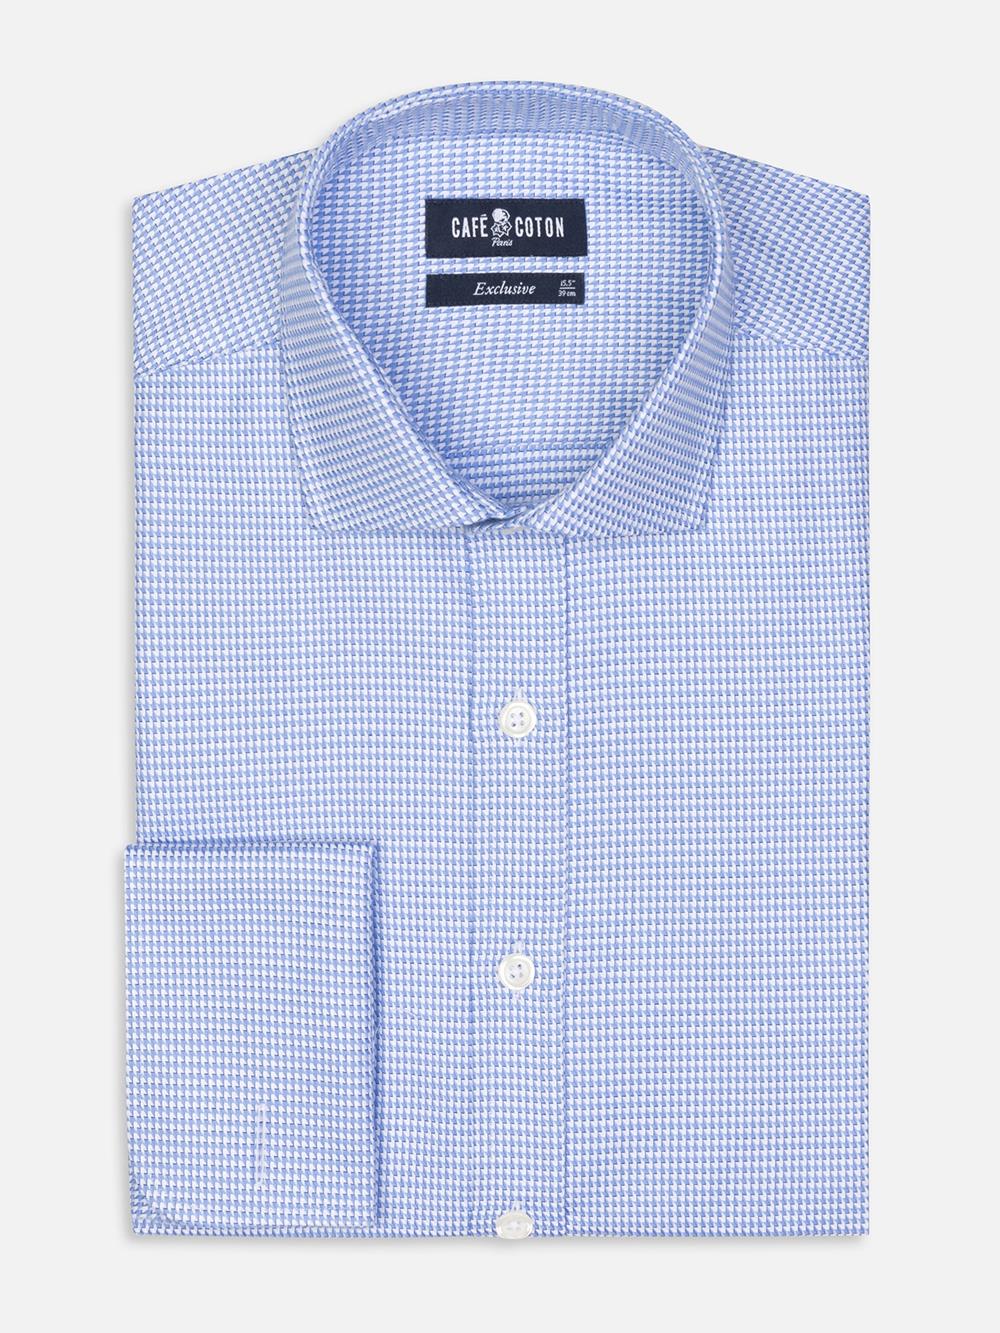 Willy sky twill slim fit shirt - Double Cuffs